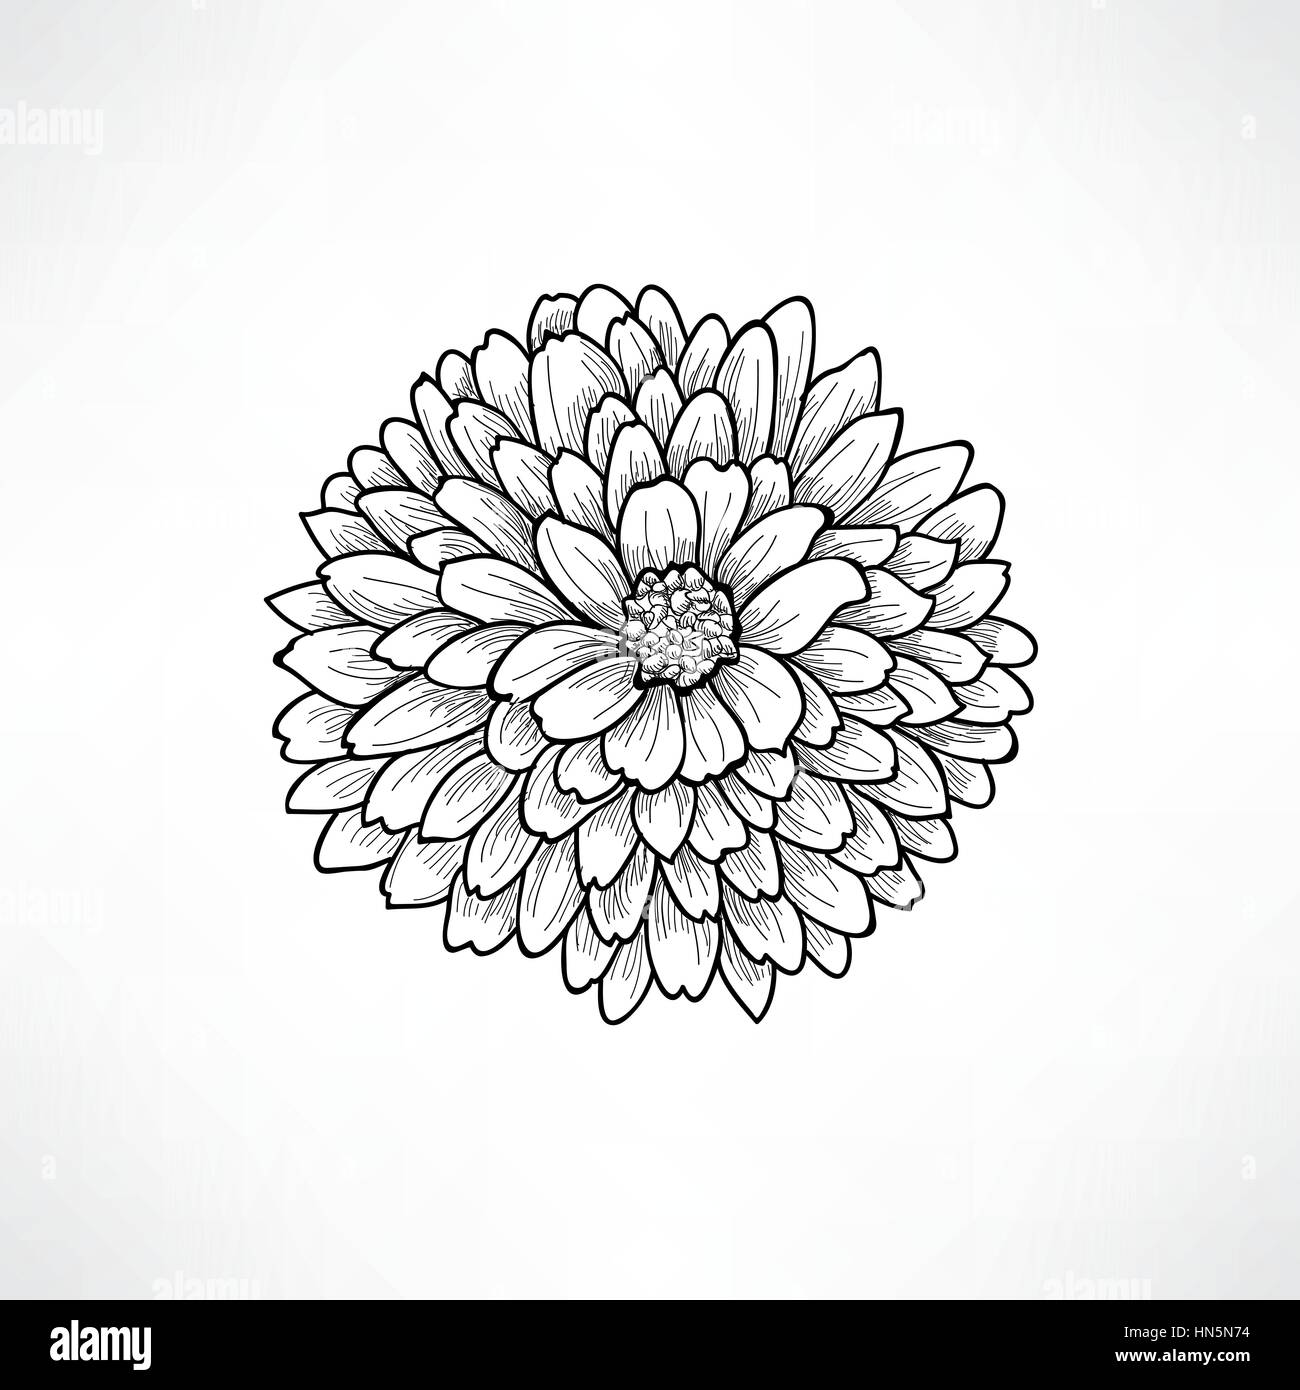 Floral background. Greeting card with flower. Flourish border. Gentle decor with summer flower dahlia. Black and white vector illustration Stock Vector